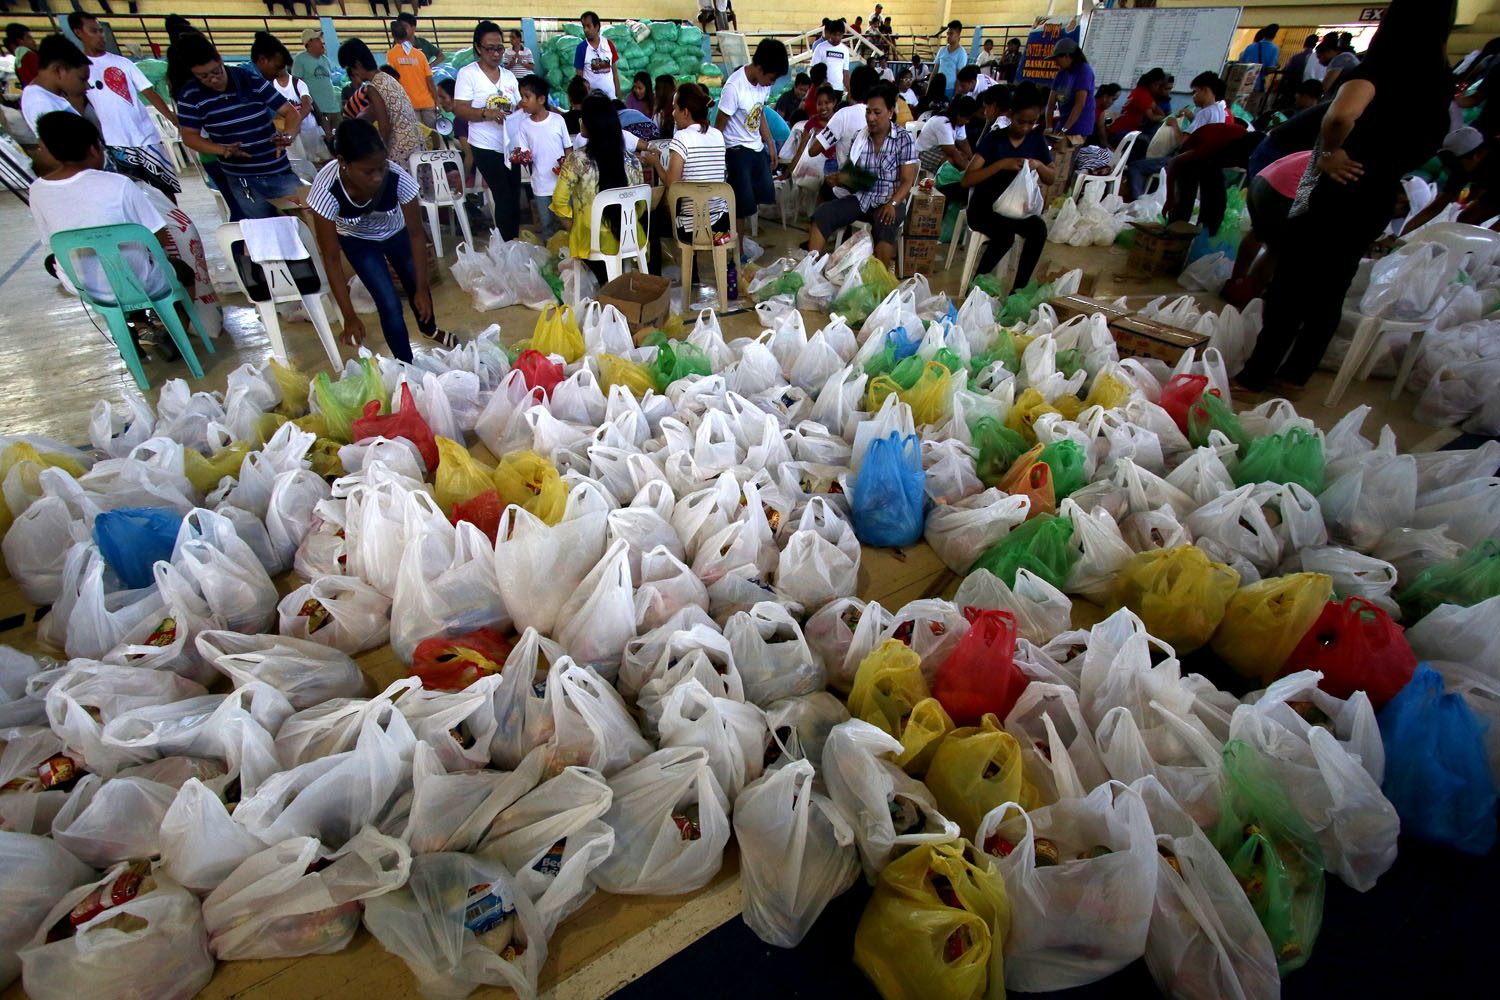 DSWD: PH has enough relief funds, foreign aid not needed now